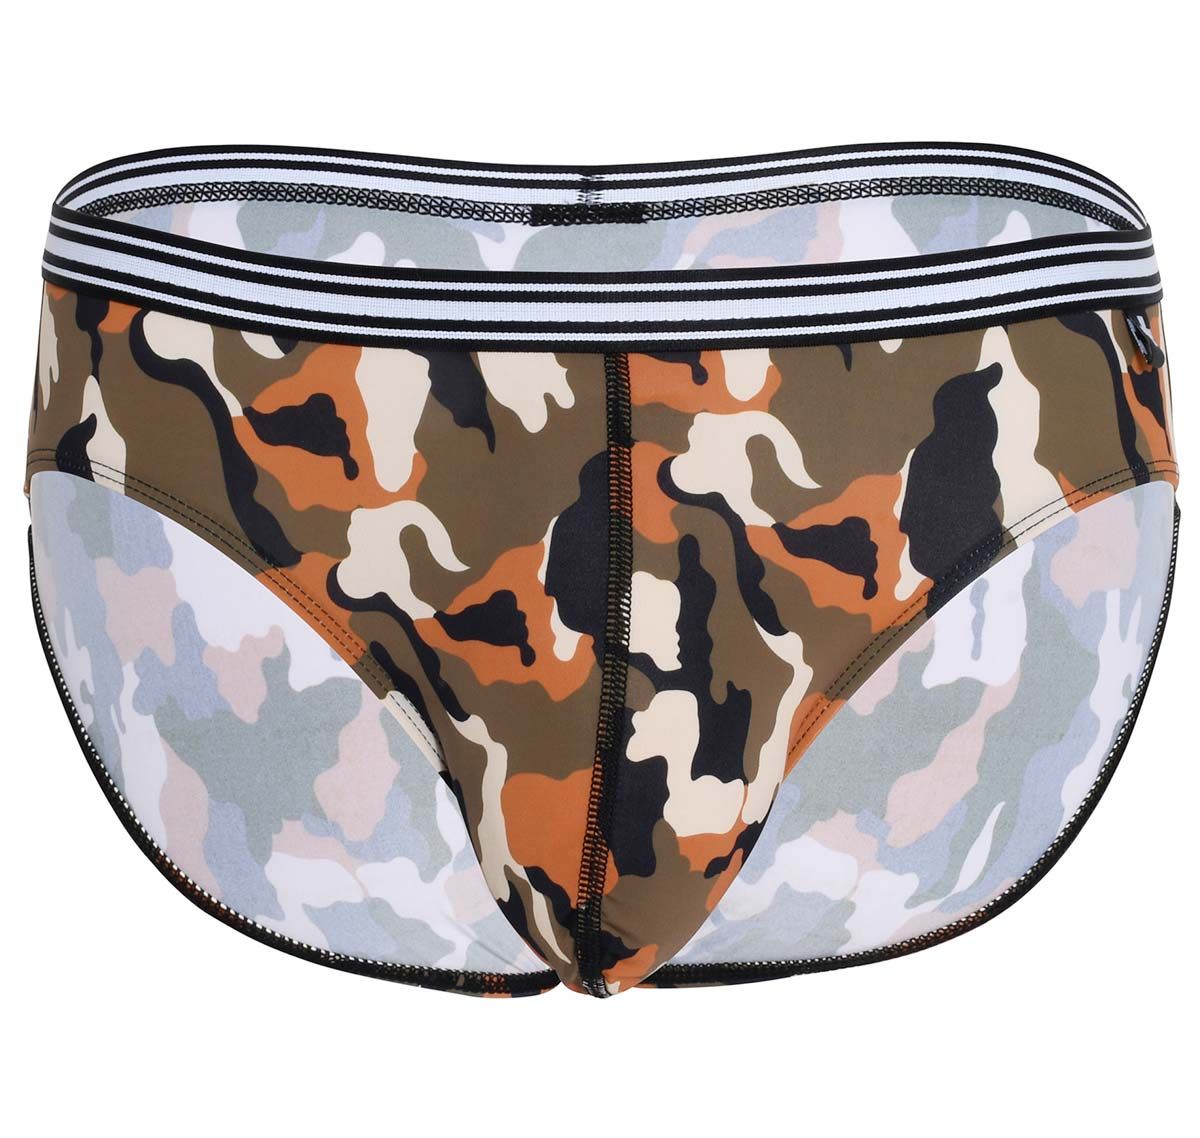 Andrew Christian 3 Paquet Slips CAMO BOY BRIEF 3-PACK 92260, multicolore